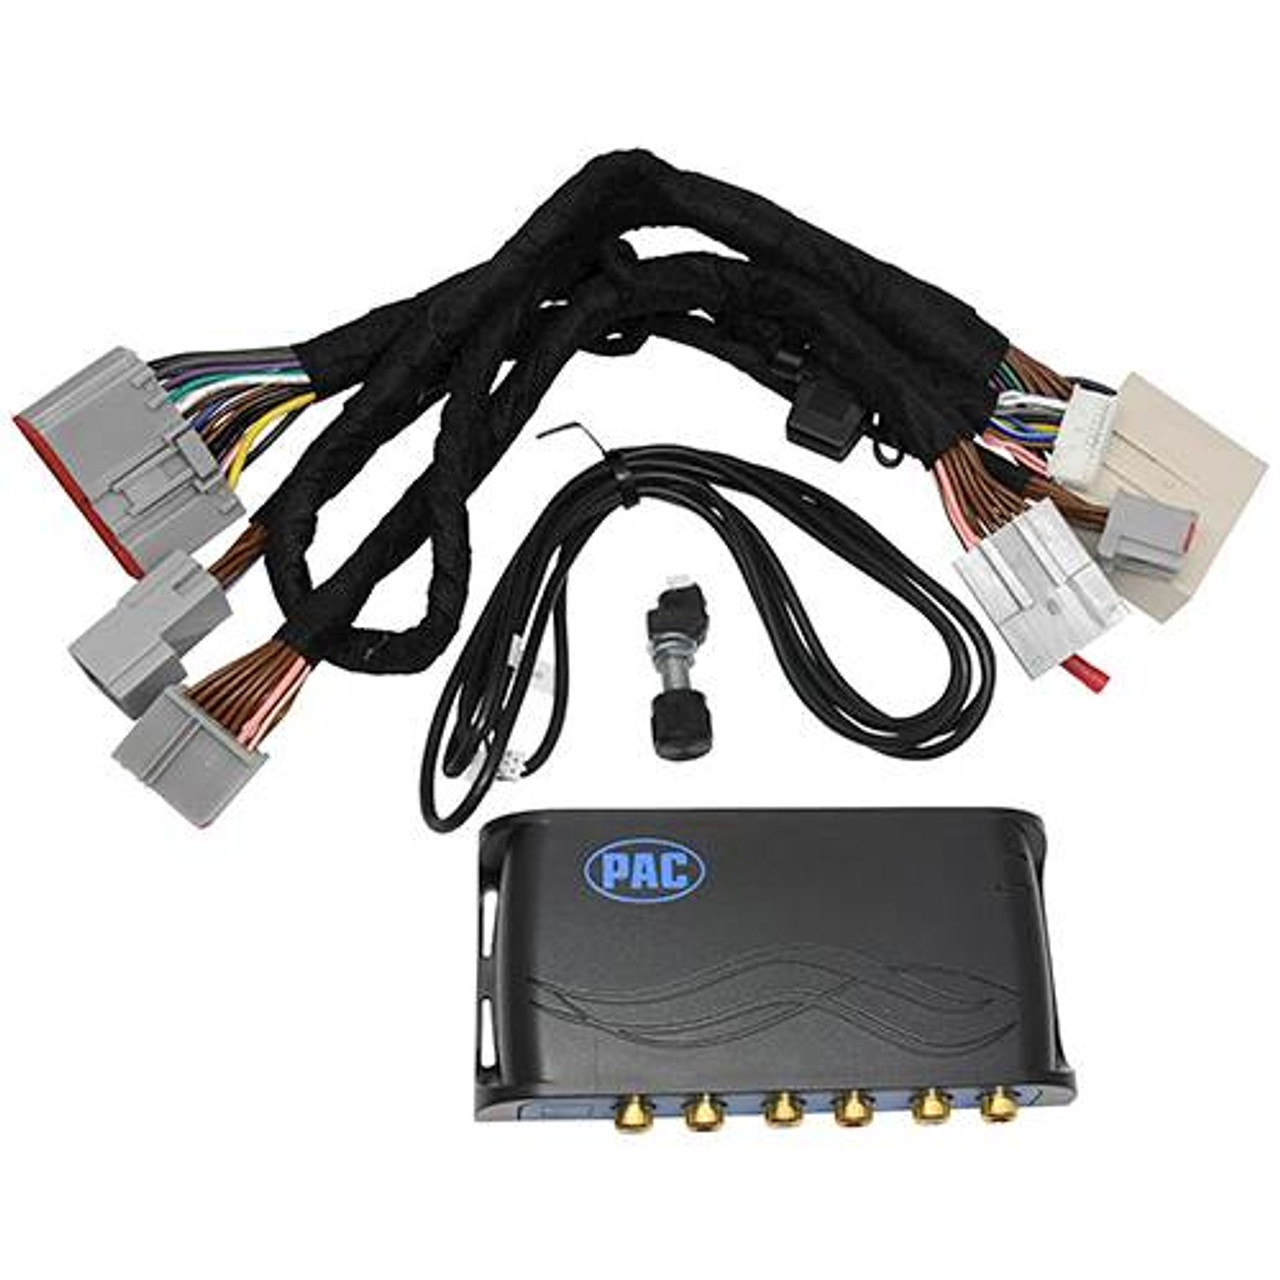 PAC - AmpPRO 4 Amplifier Interface for Select Ford and Lincoln Vehicles - Black